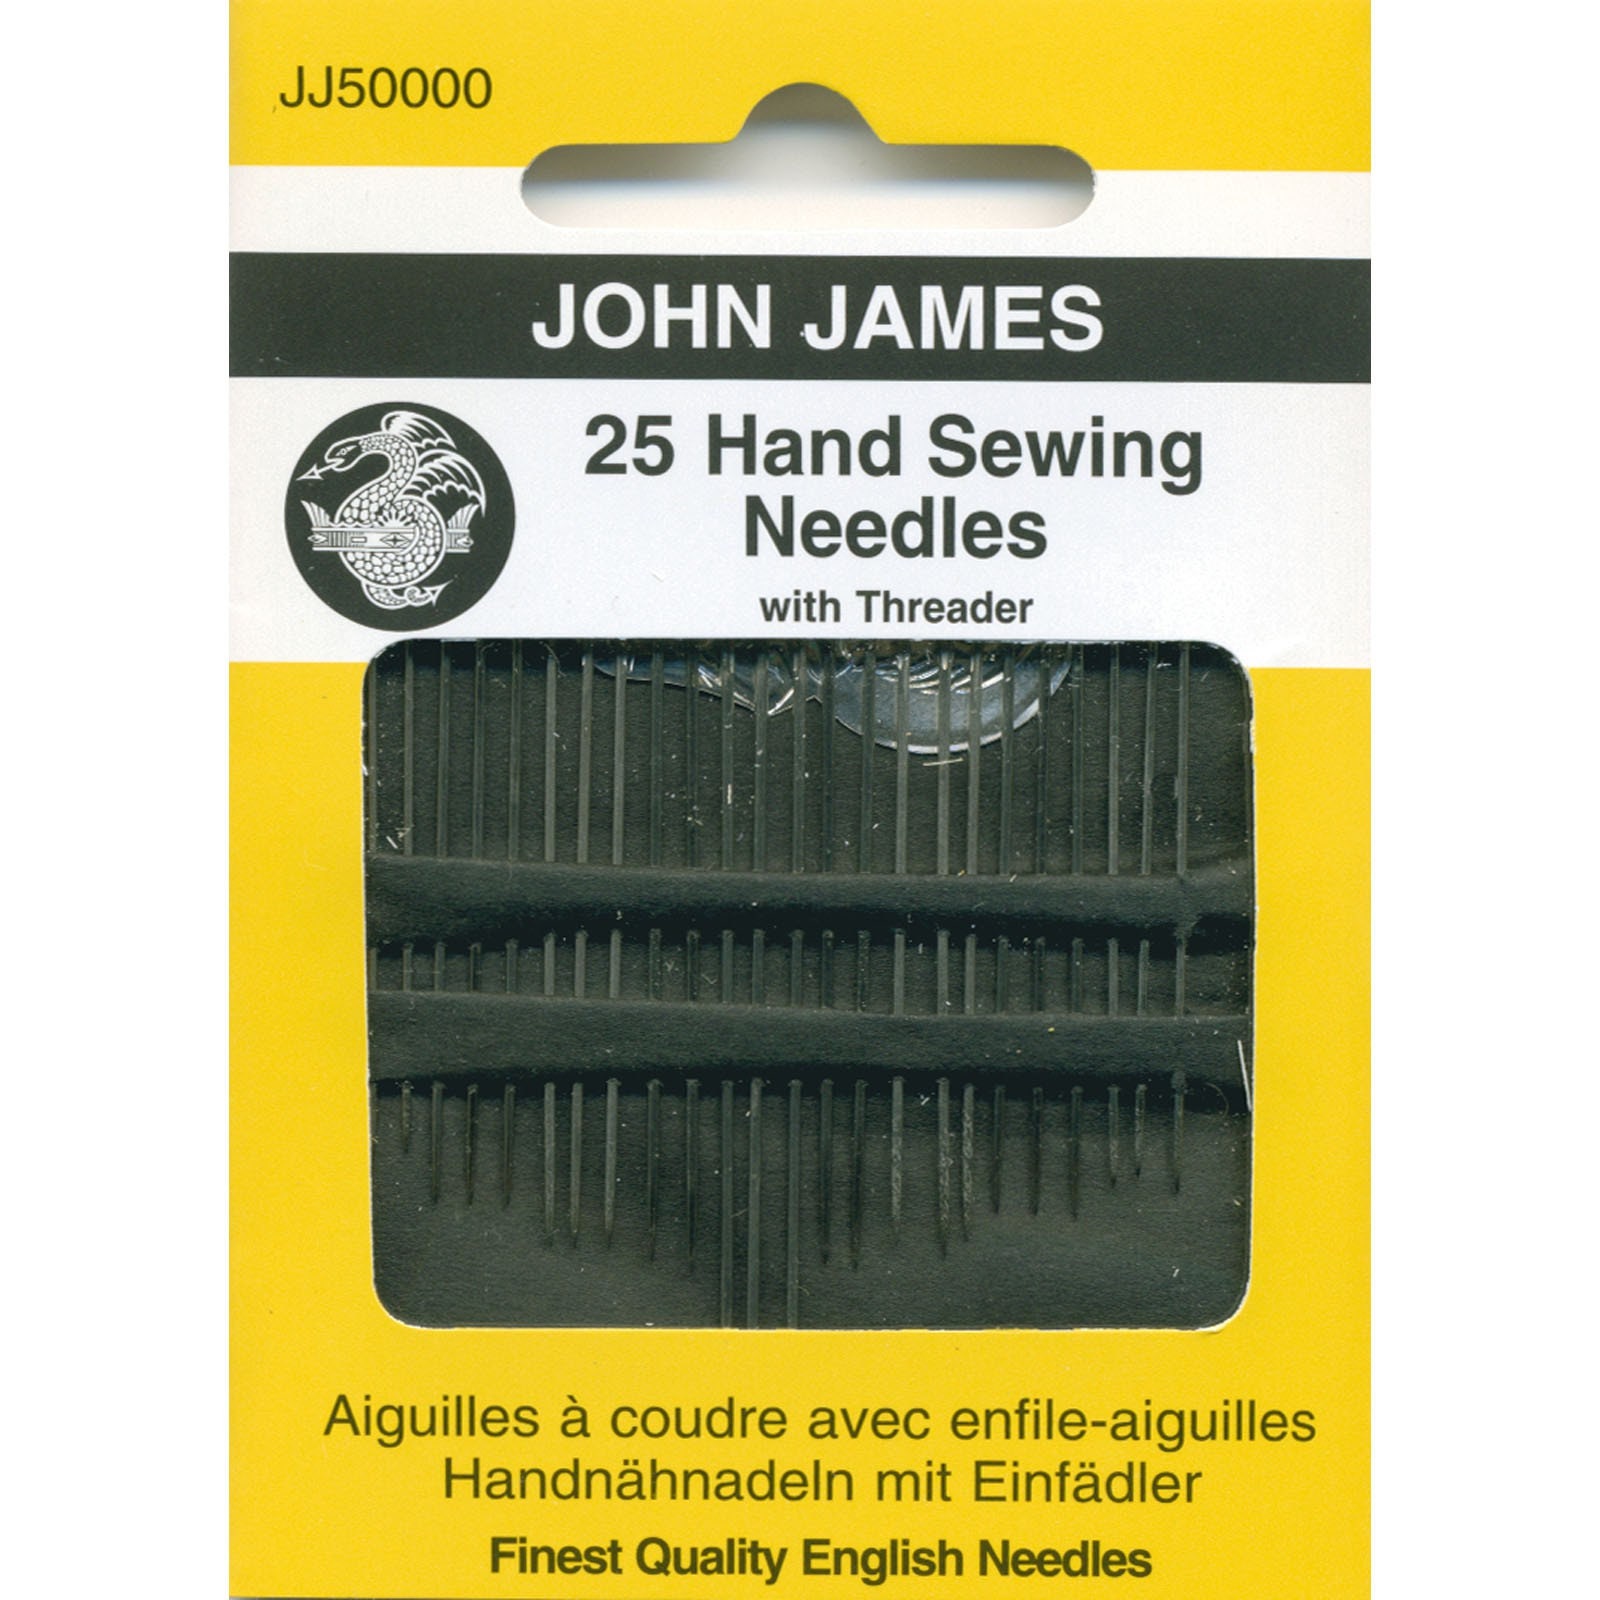 Saddlers Needles Aiguilles Selliers, Leather Hand Sewing Needles